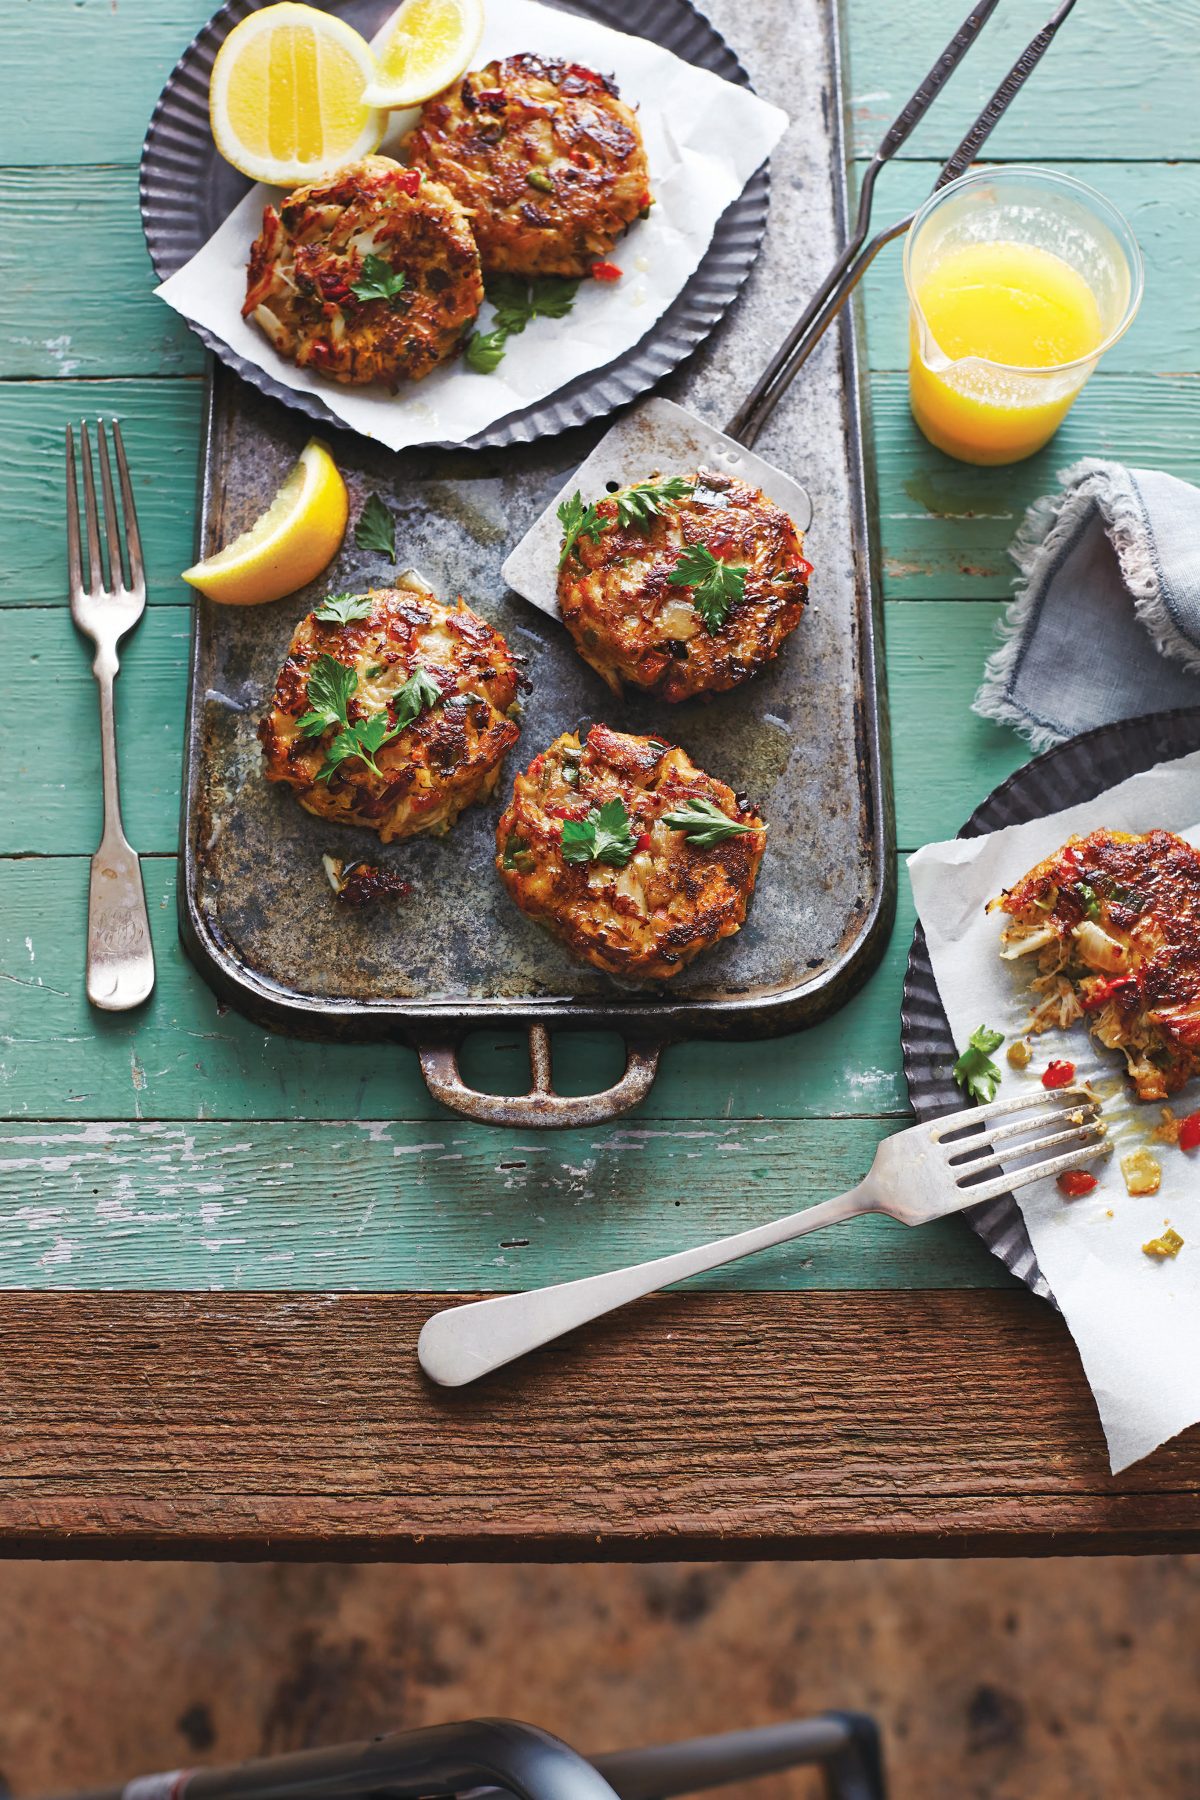 Gulf crab cakes with lemon butter from Jessica Dupuy's "The United States of Texas." Photo courtesy Time Inc, Books.